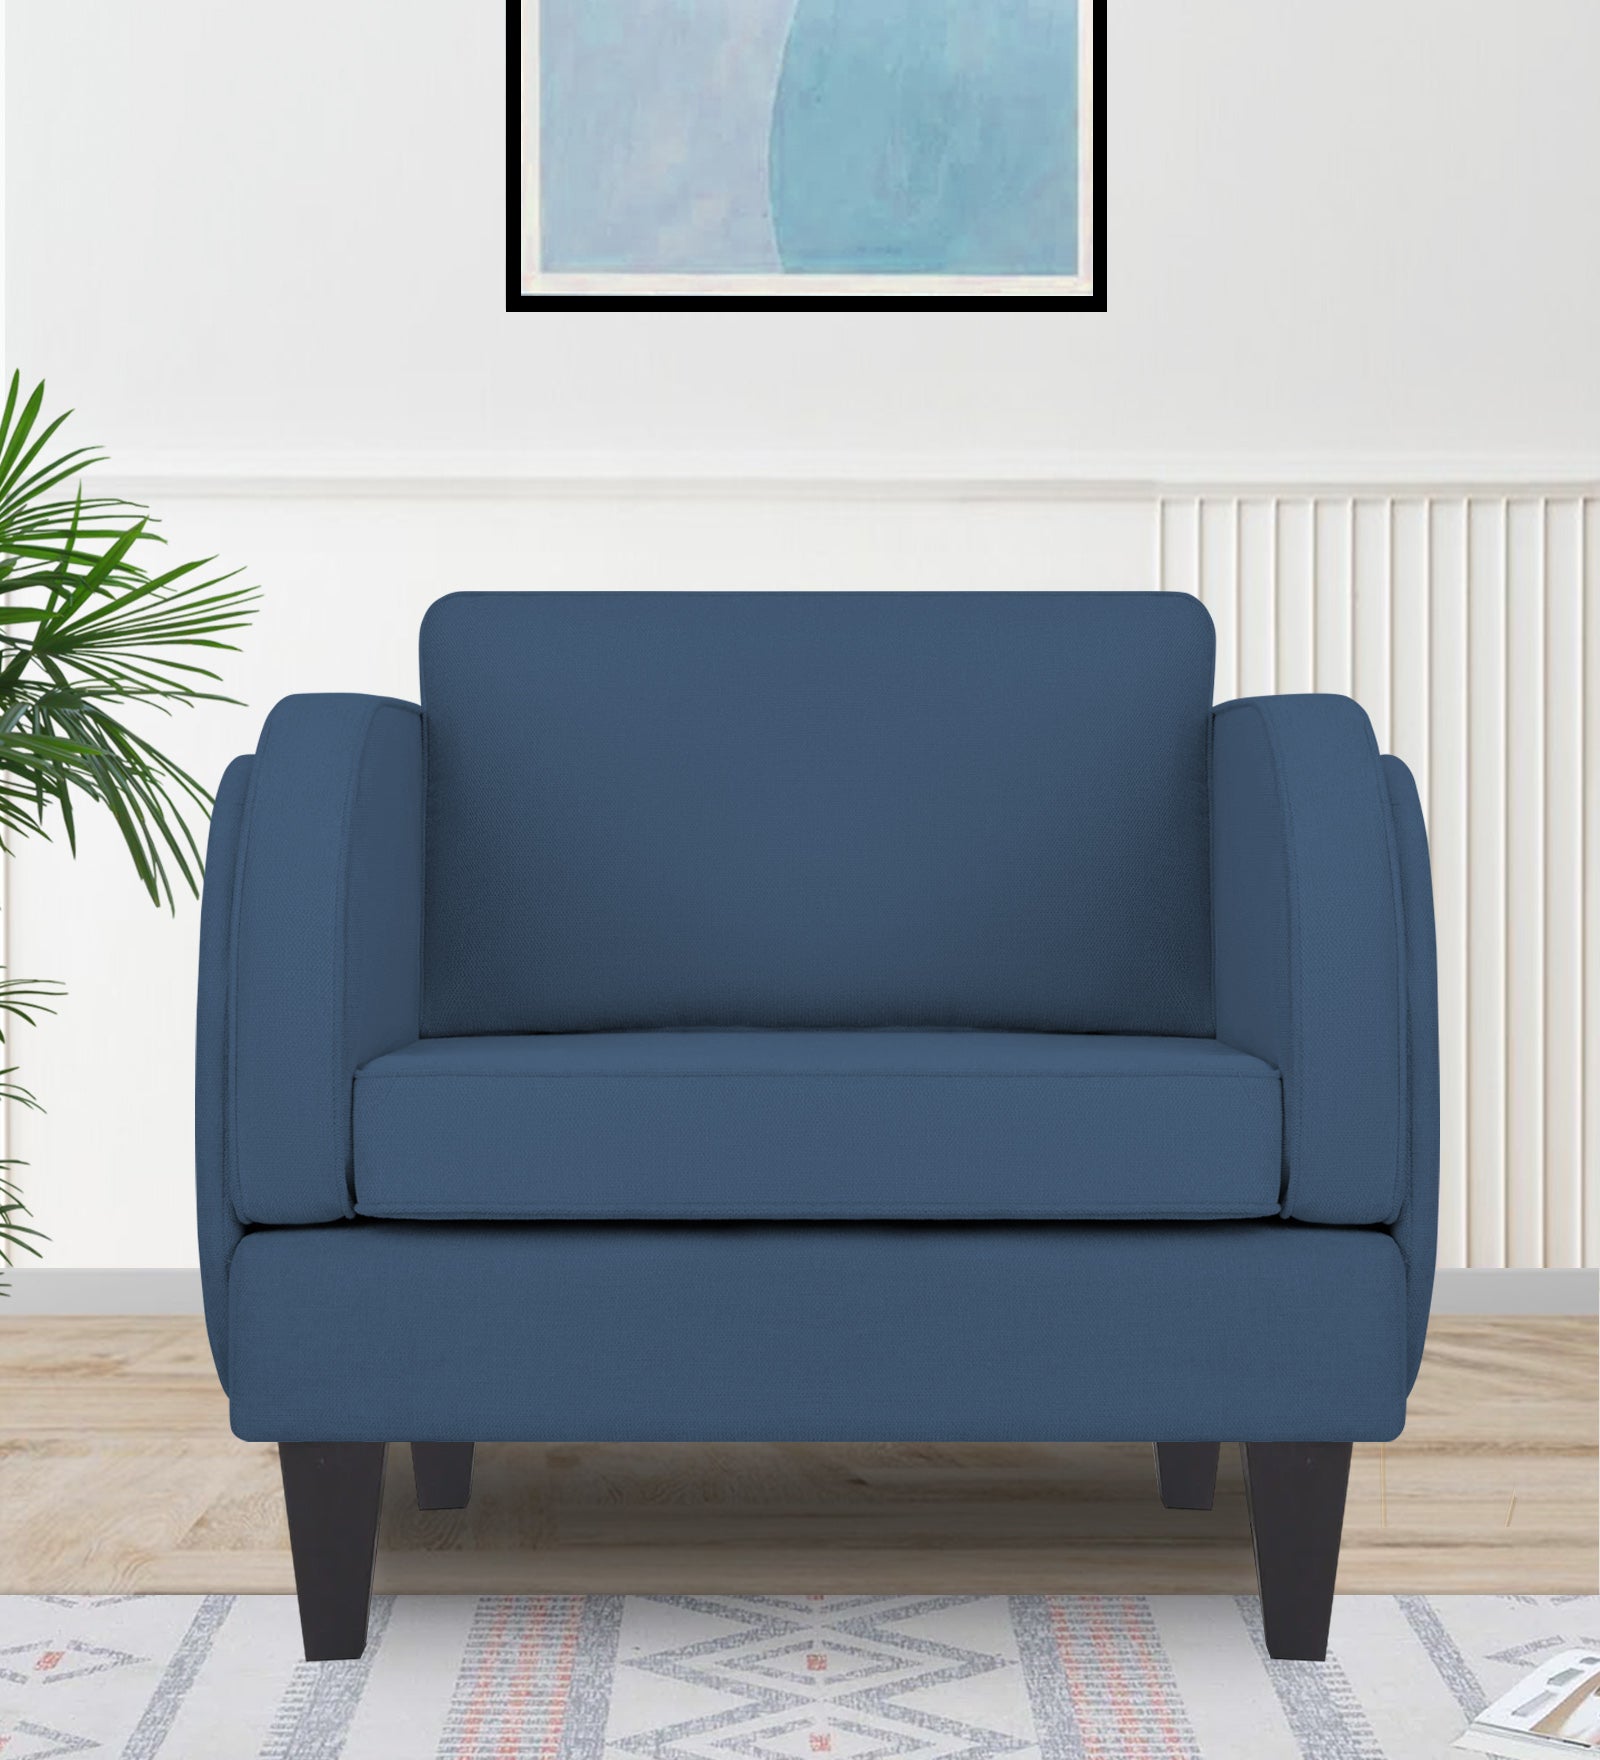 Siddy Fabric 1 Seater Sofa in Light Blue Colour